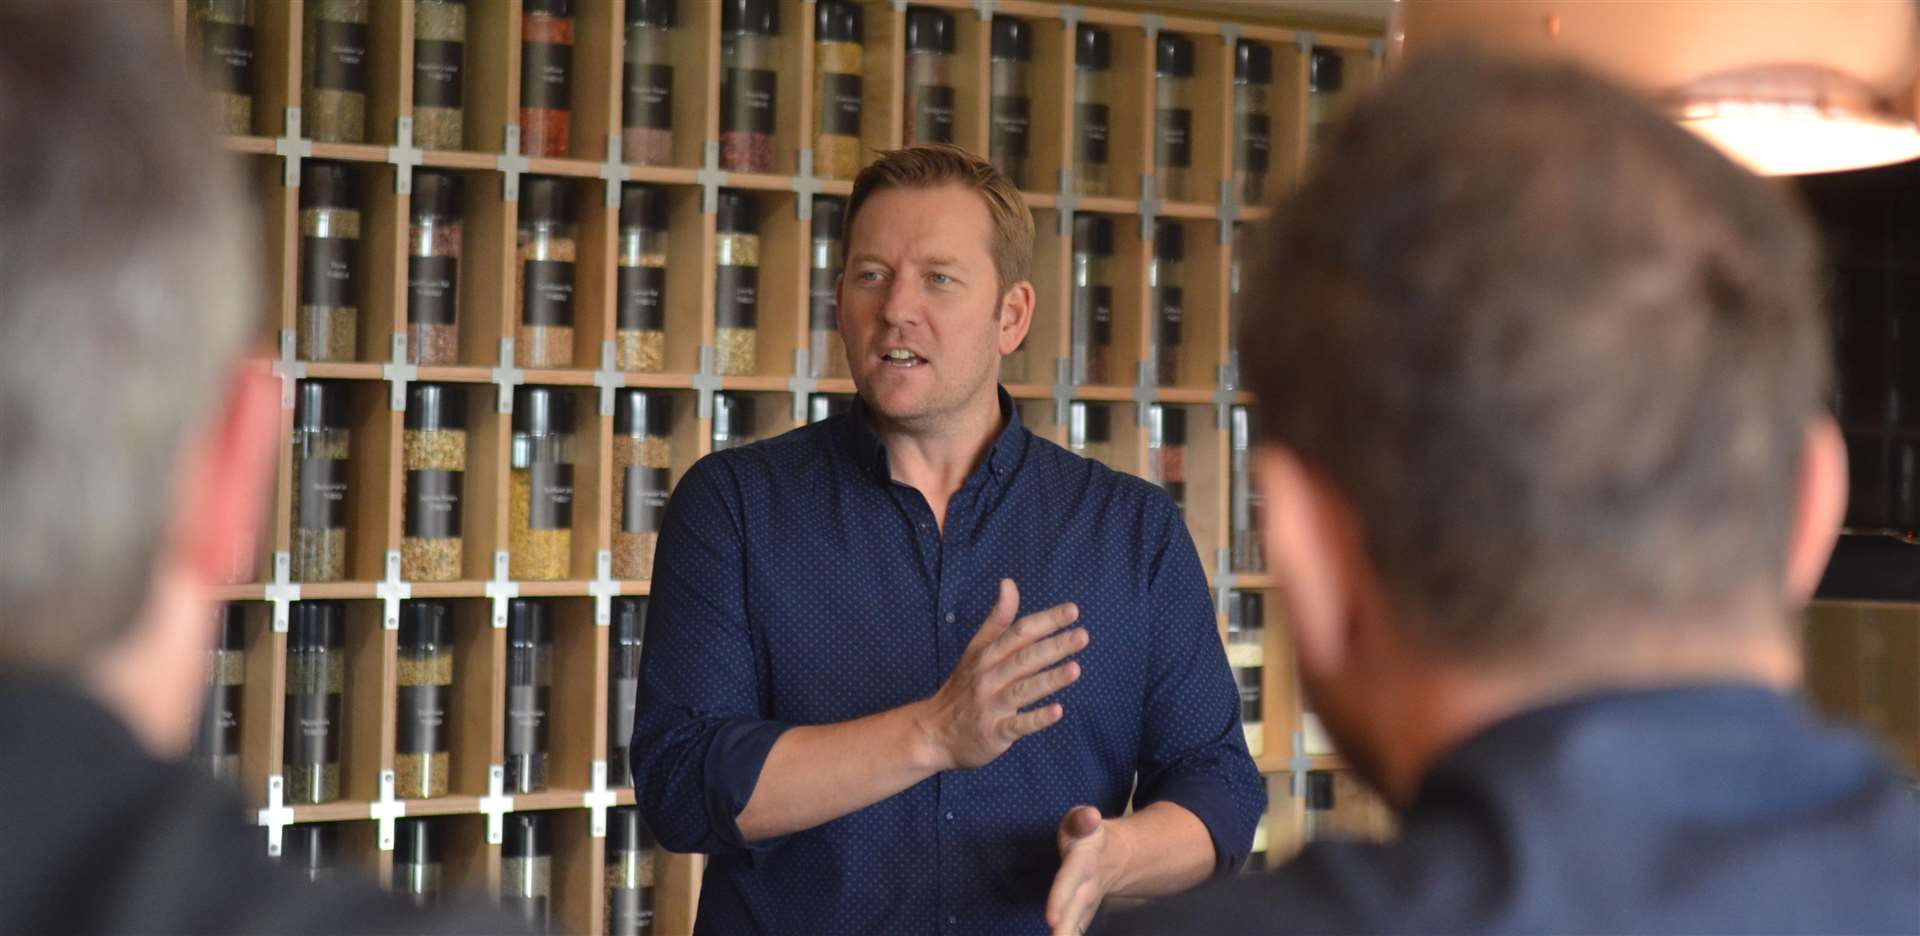 The ultimate cuppa companion: Master Tea Blender Alex Probyn has hosted tea tasting events in over 20 countries for groups of up to 500 people.